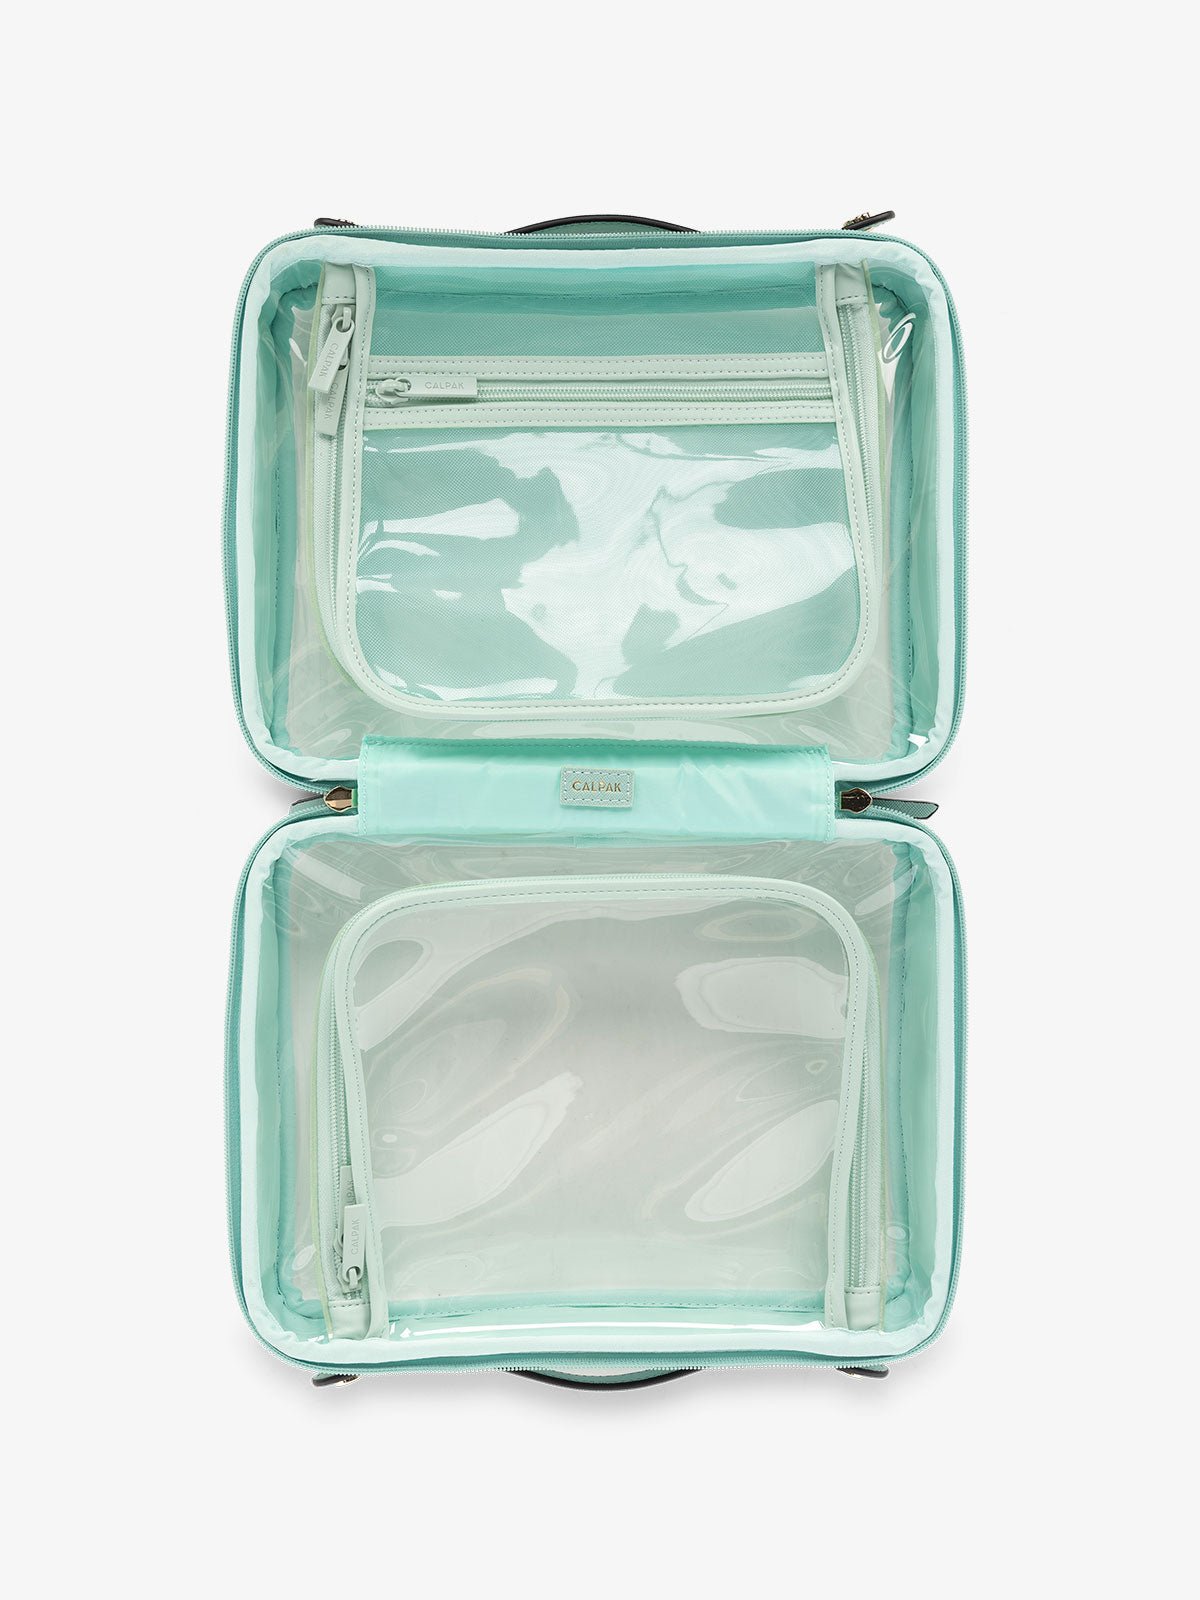 CALPAK clear case with dual handles and mesh interior compartment in light blue